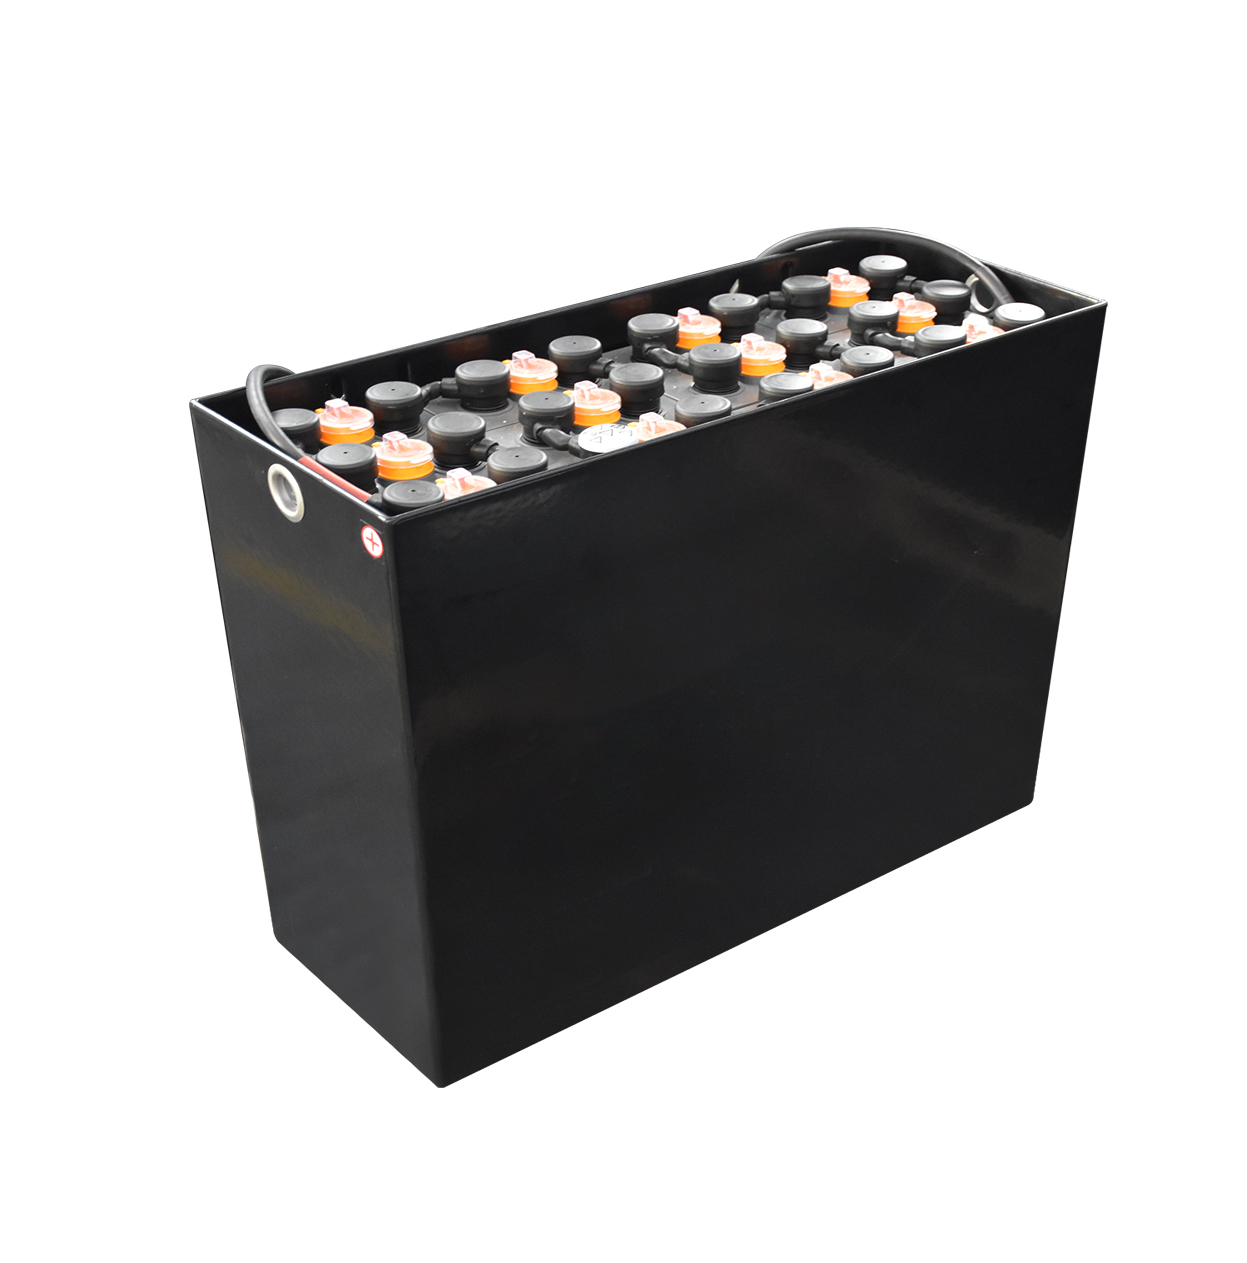  BS Standard Forklift battery 24V 4PZB280 Traction battery with bolted type connection rechargeable traction forklift battery